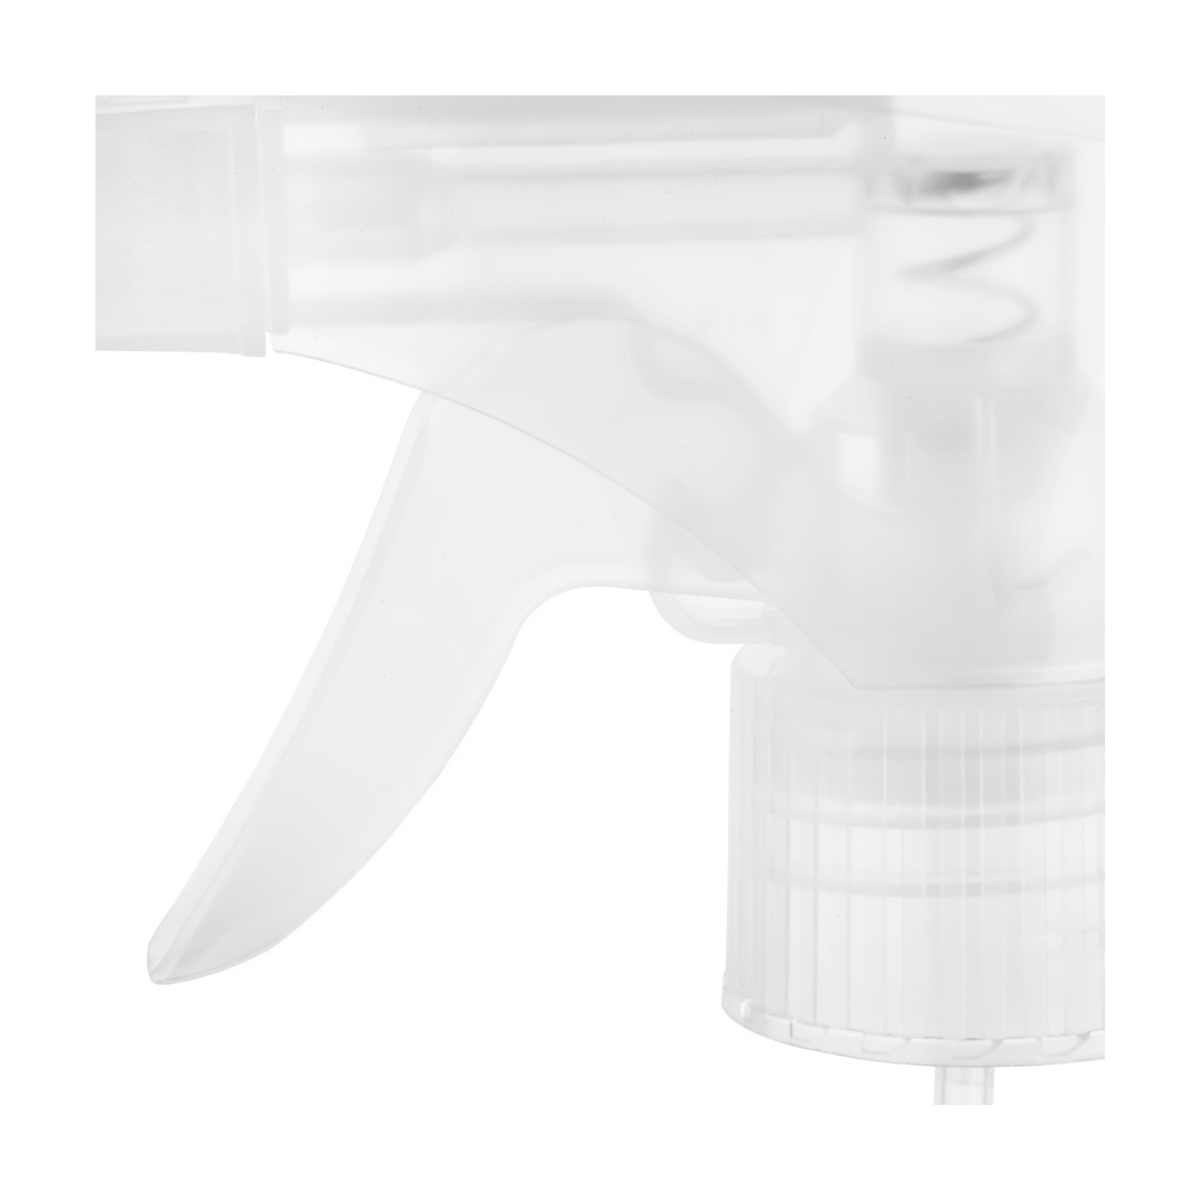 Dompel Trigger Sprayers valves, color clear, thread 28/410, made with stainless steel springs and glass balls, with spray and stream Model 101D - depilcompany